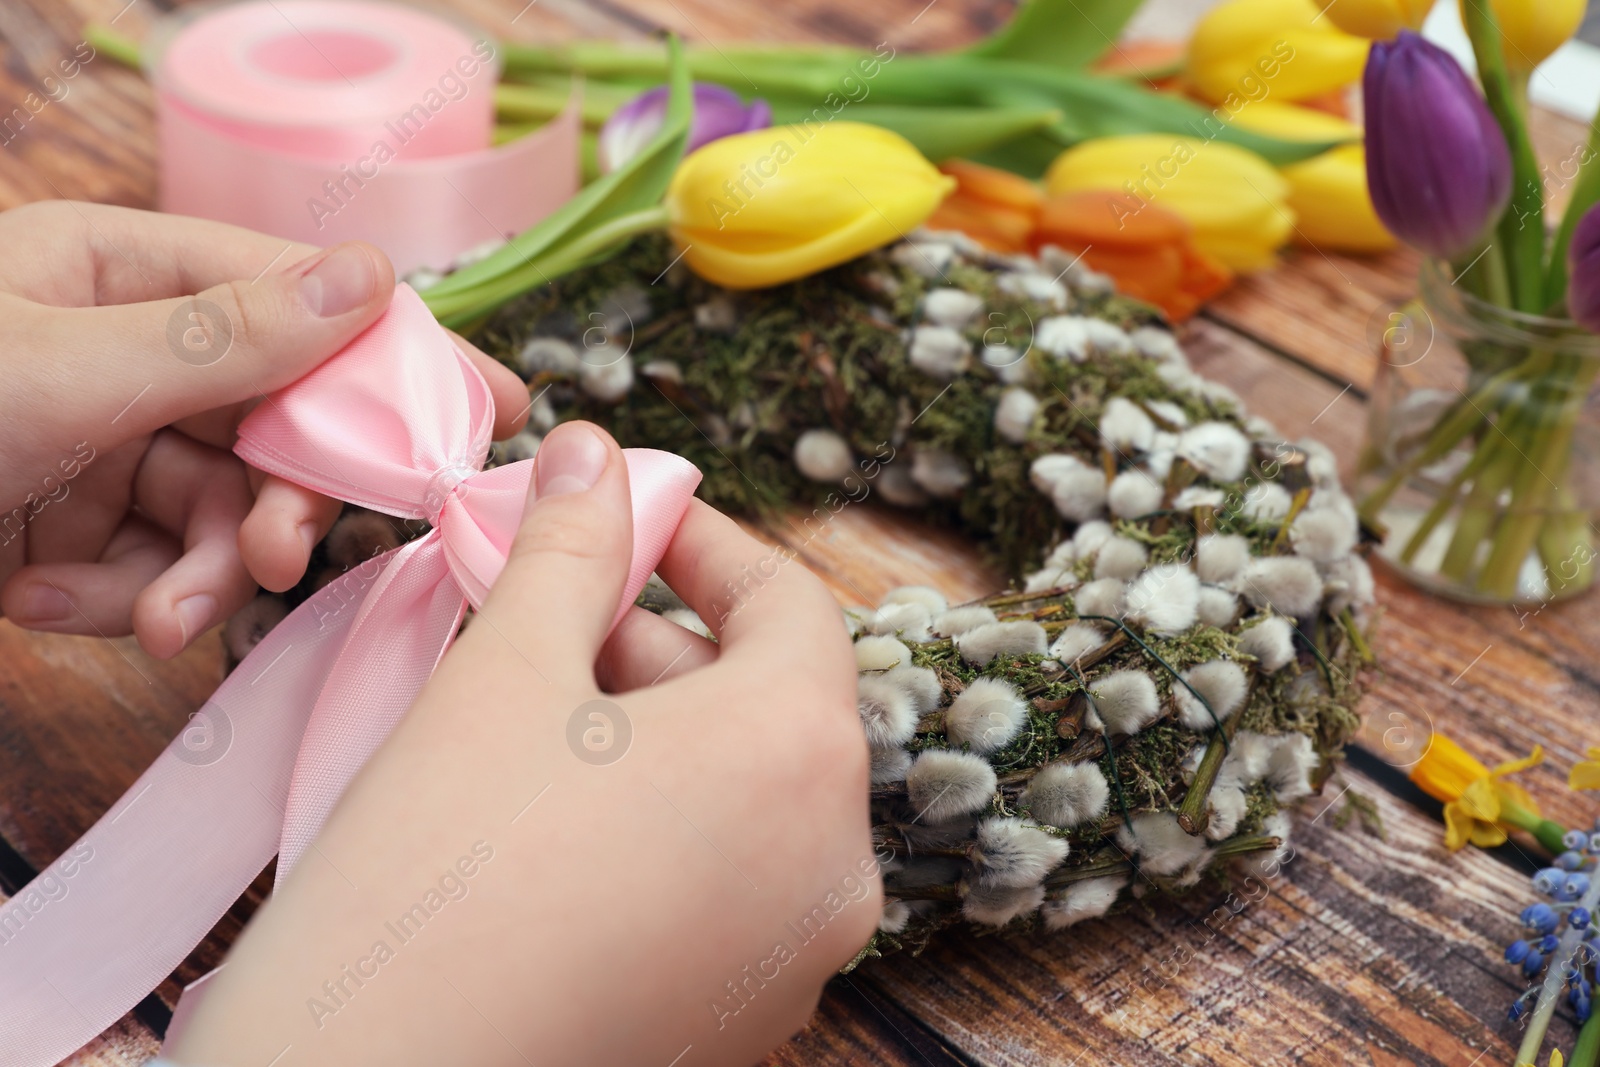 Photo of Woman decorating willow wreath with pink bow at wooden table, closeup